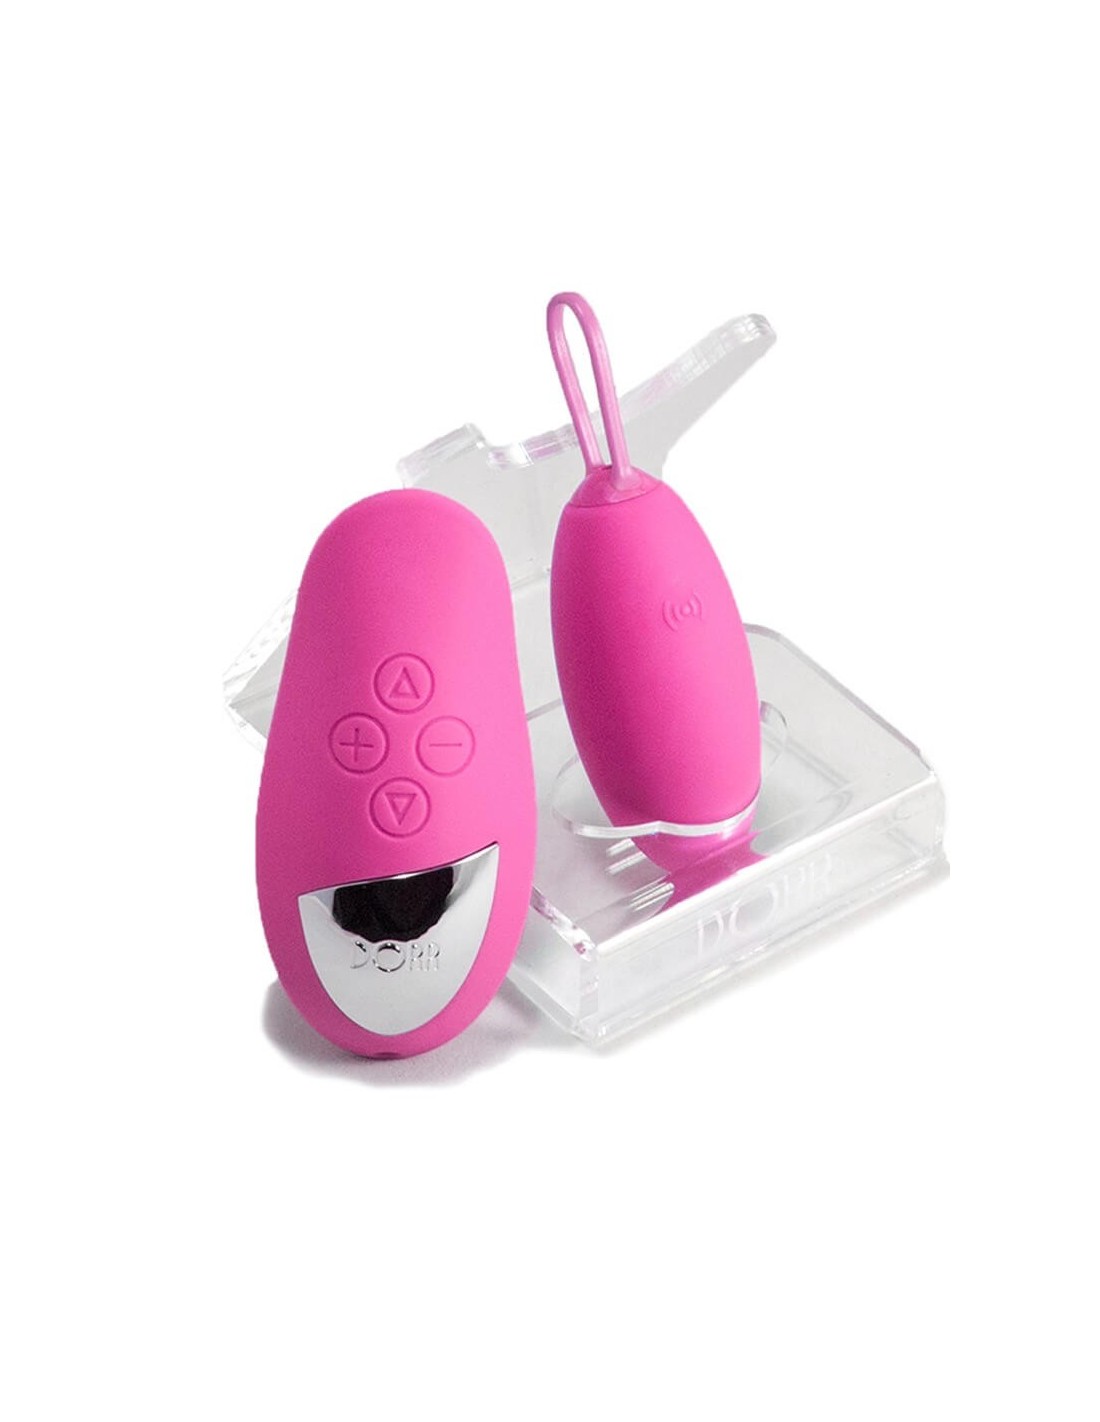 Dorr Spot Wireless Egg and Lay-on Vibrator Pink image pic